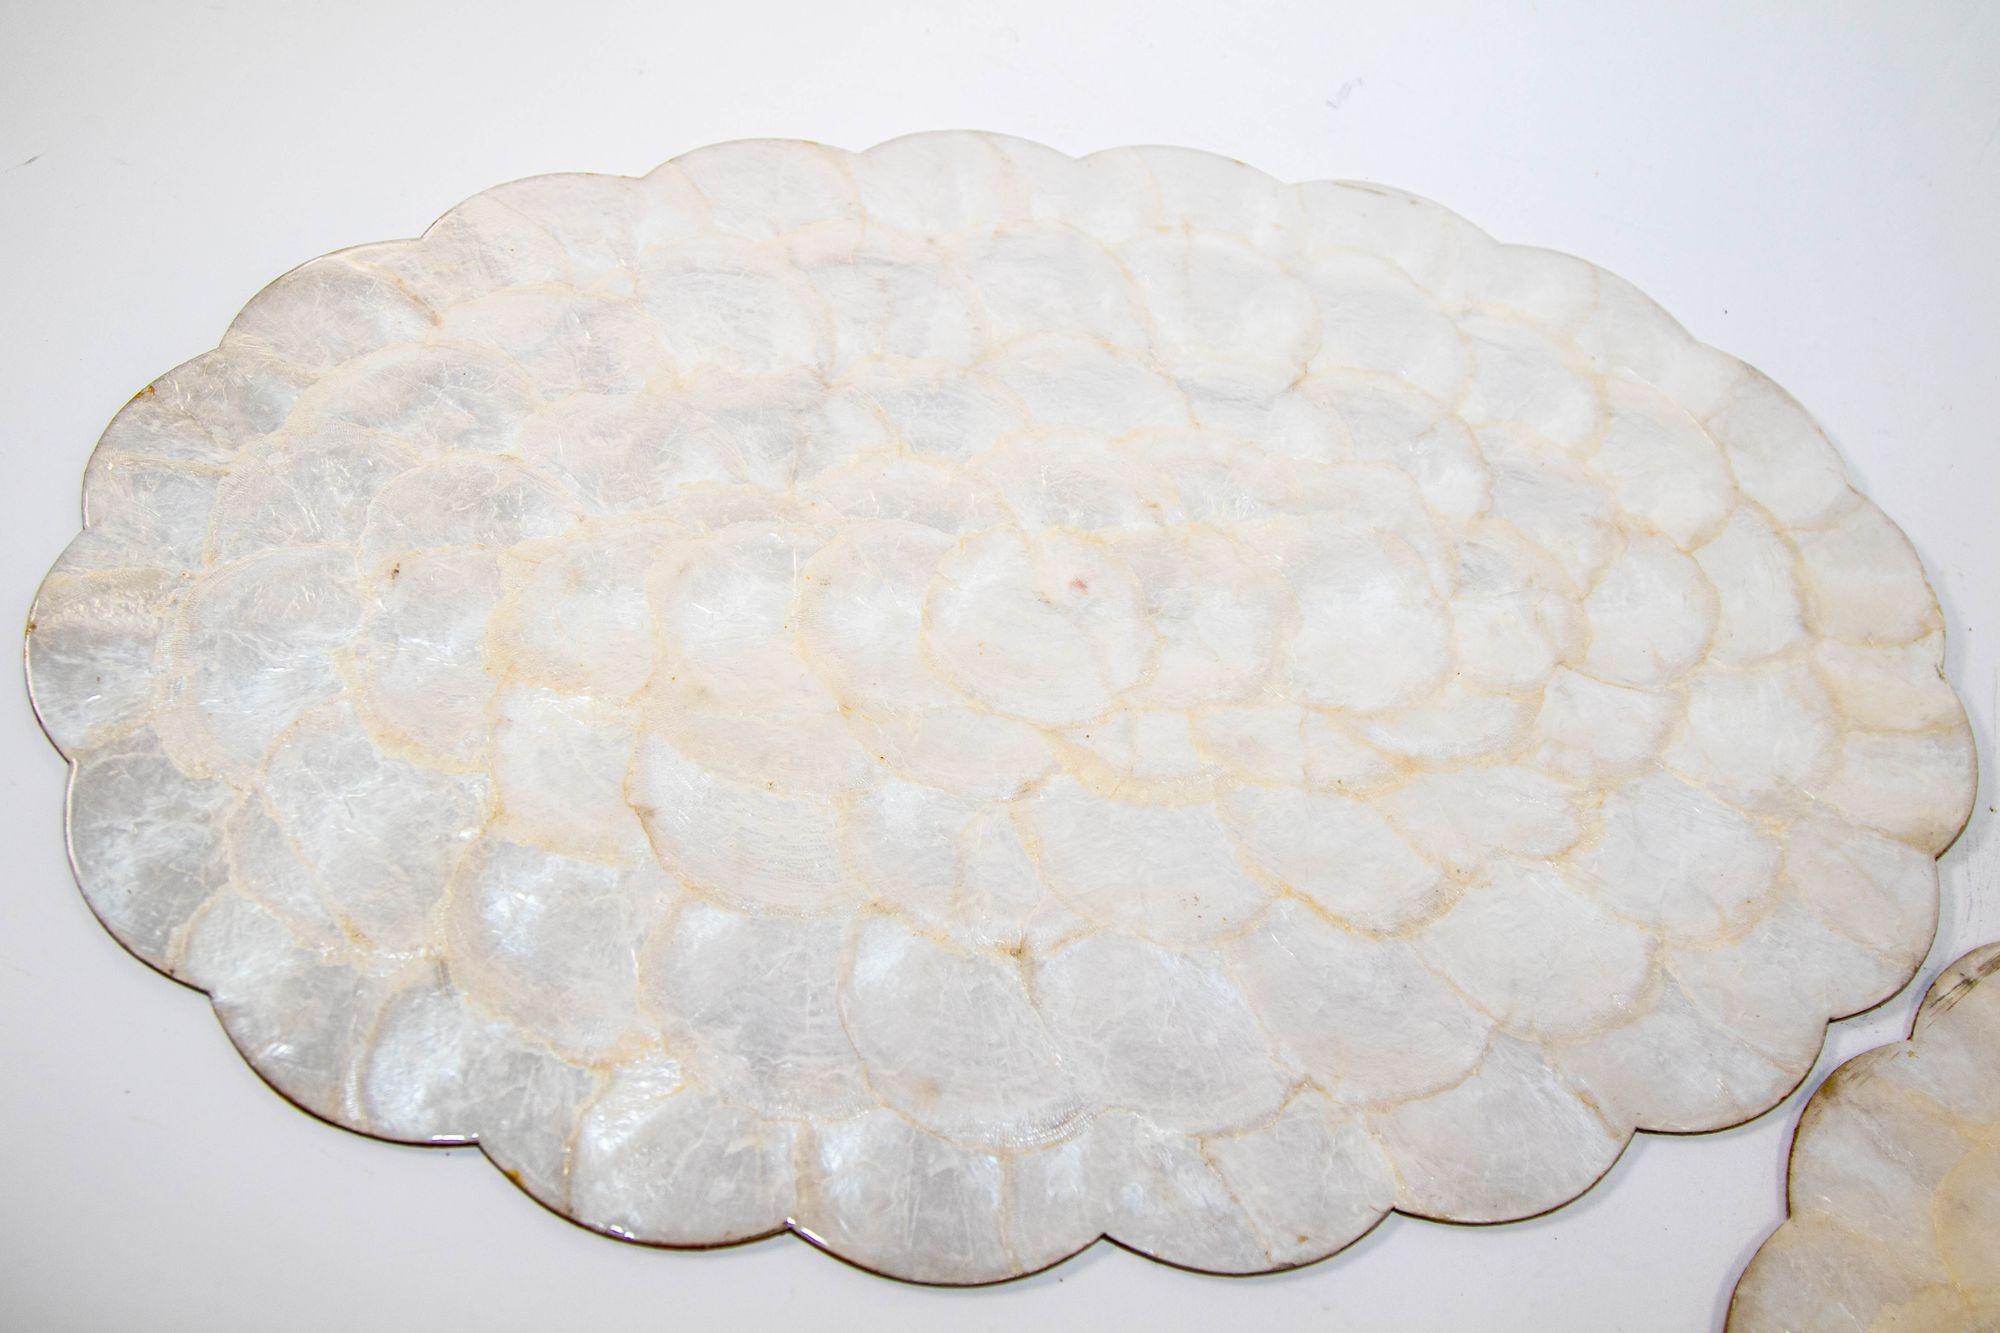 1960s Hallie St Mary 2 Placemats in Natural Capiz Pearl Shell Scalloped Edge 10